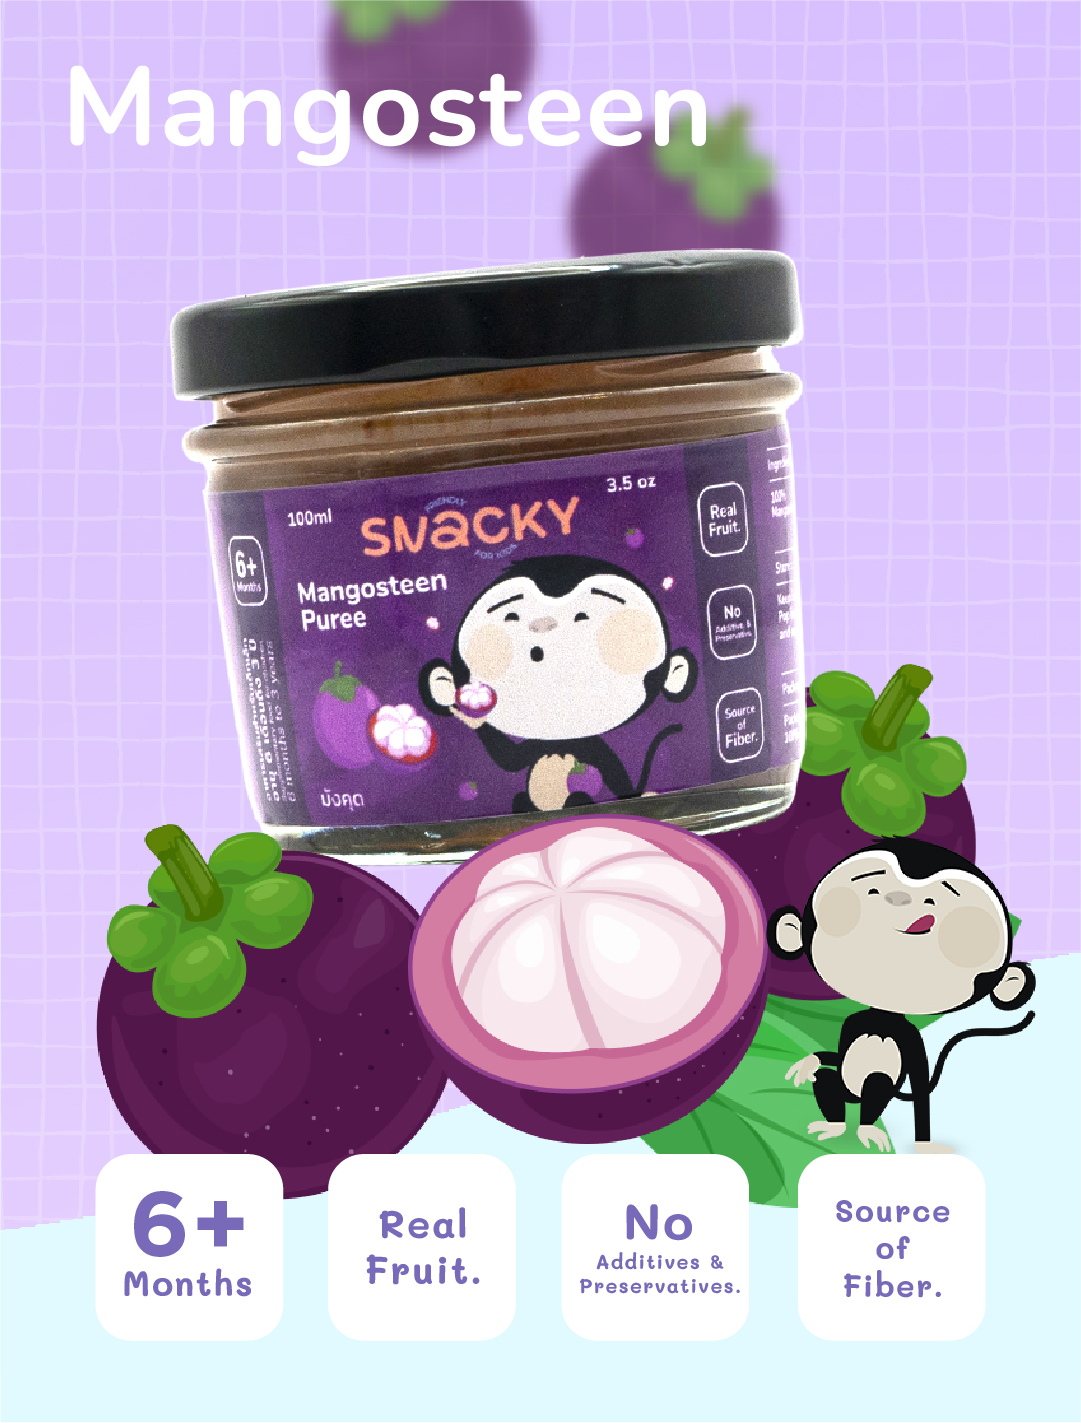 SNACKY_D2_Banner_Mobile